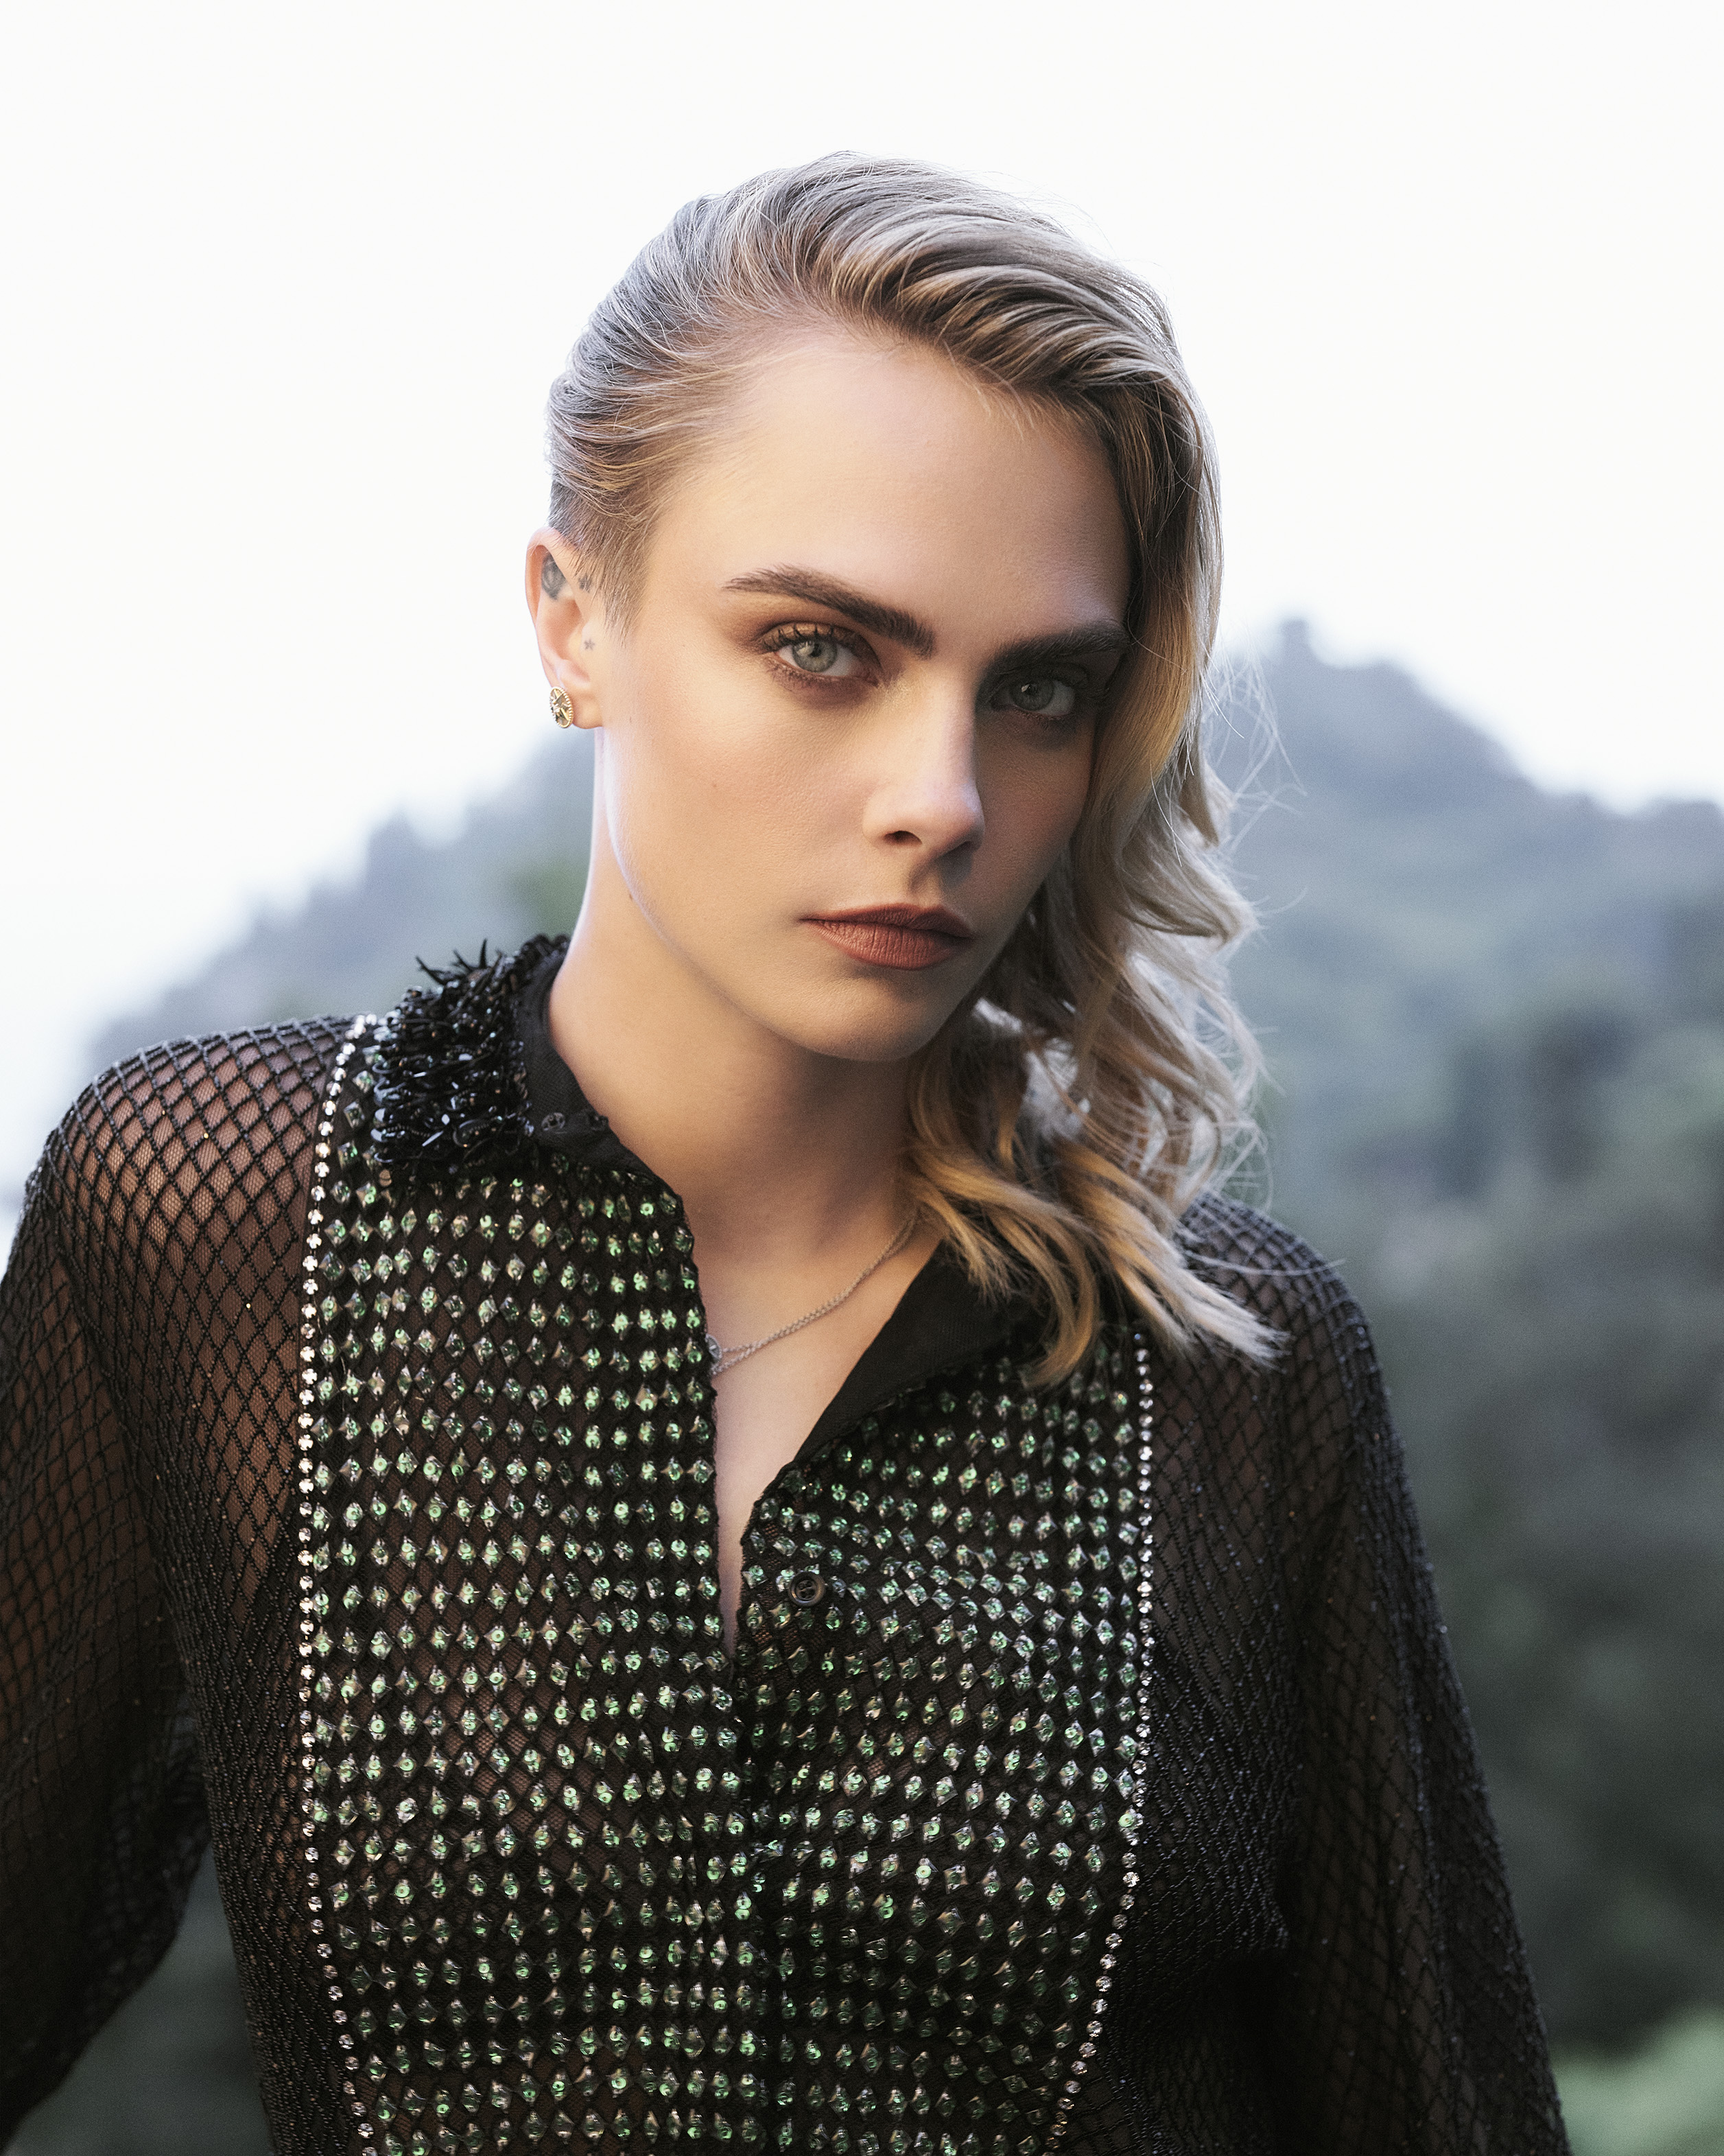 Dior on X: Live la dolce vita with @Caradelevingne as she spends